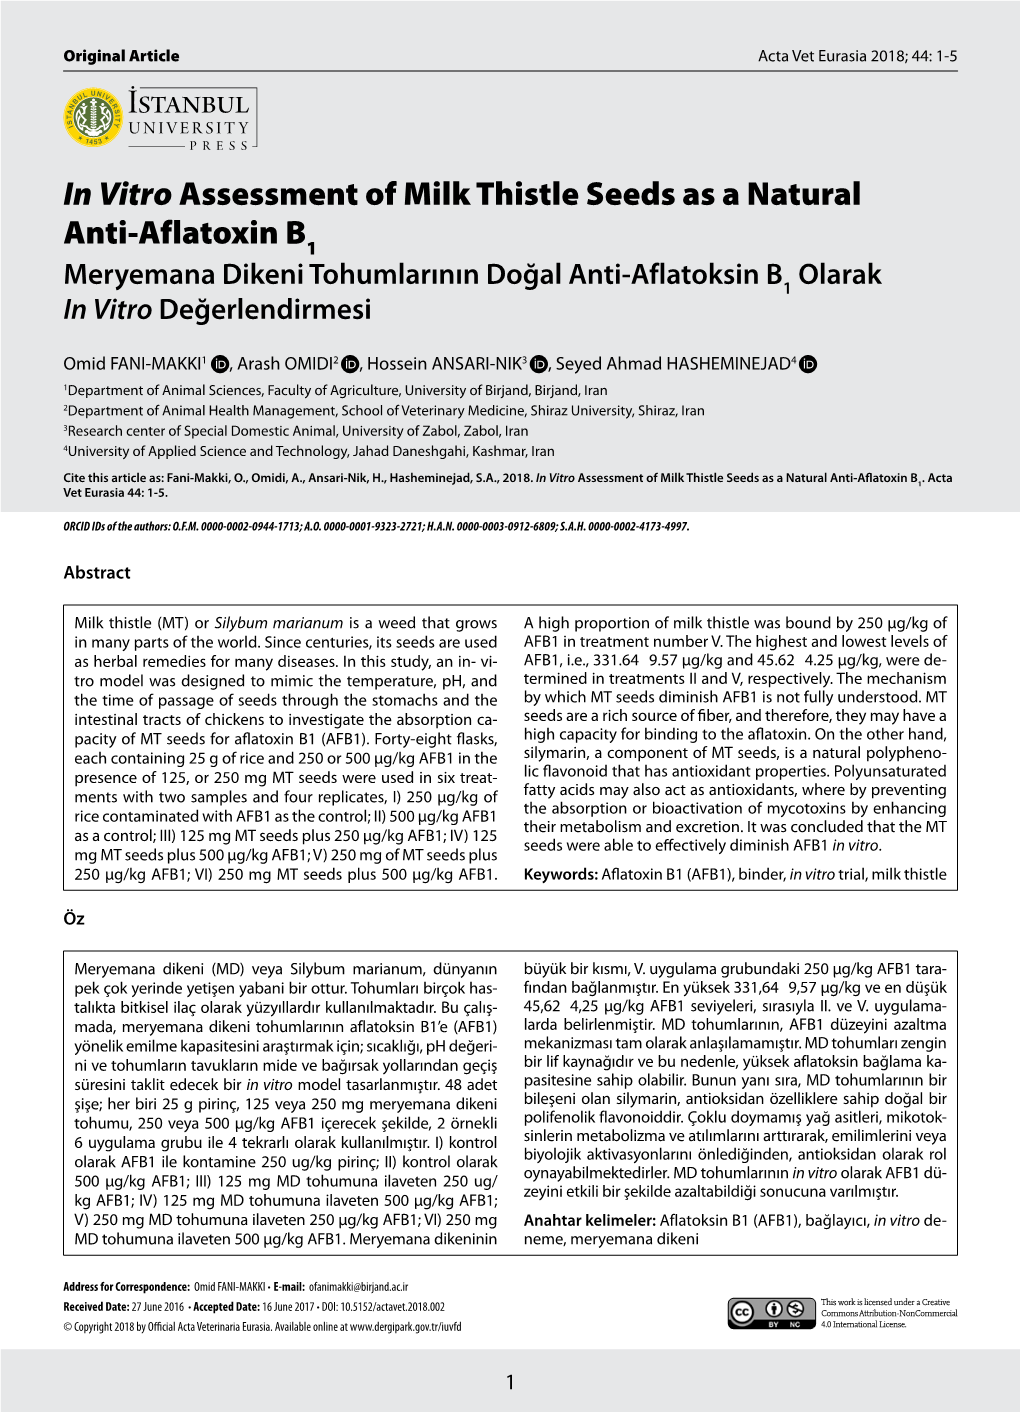 In Vitro Assessment of Milk Thistle Seeds As a Natural Anti-Aflatoxin B